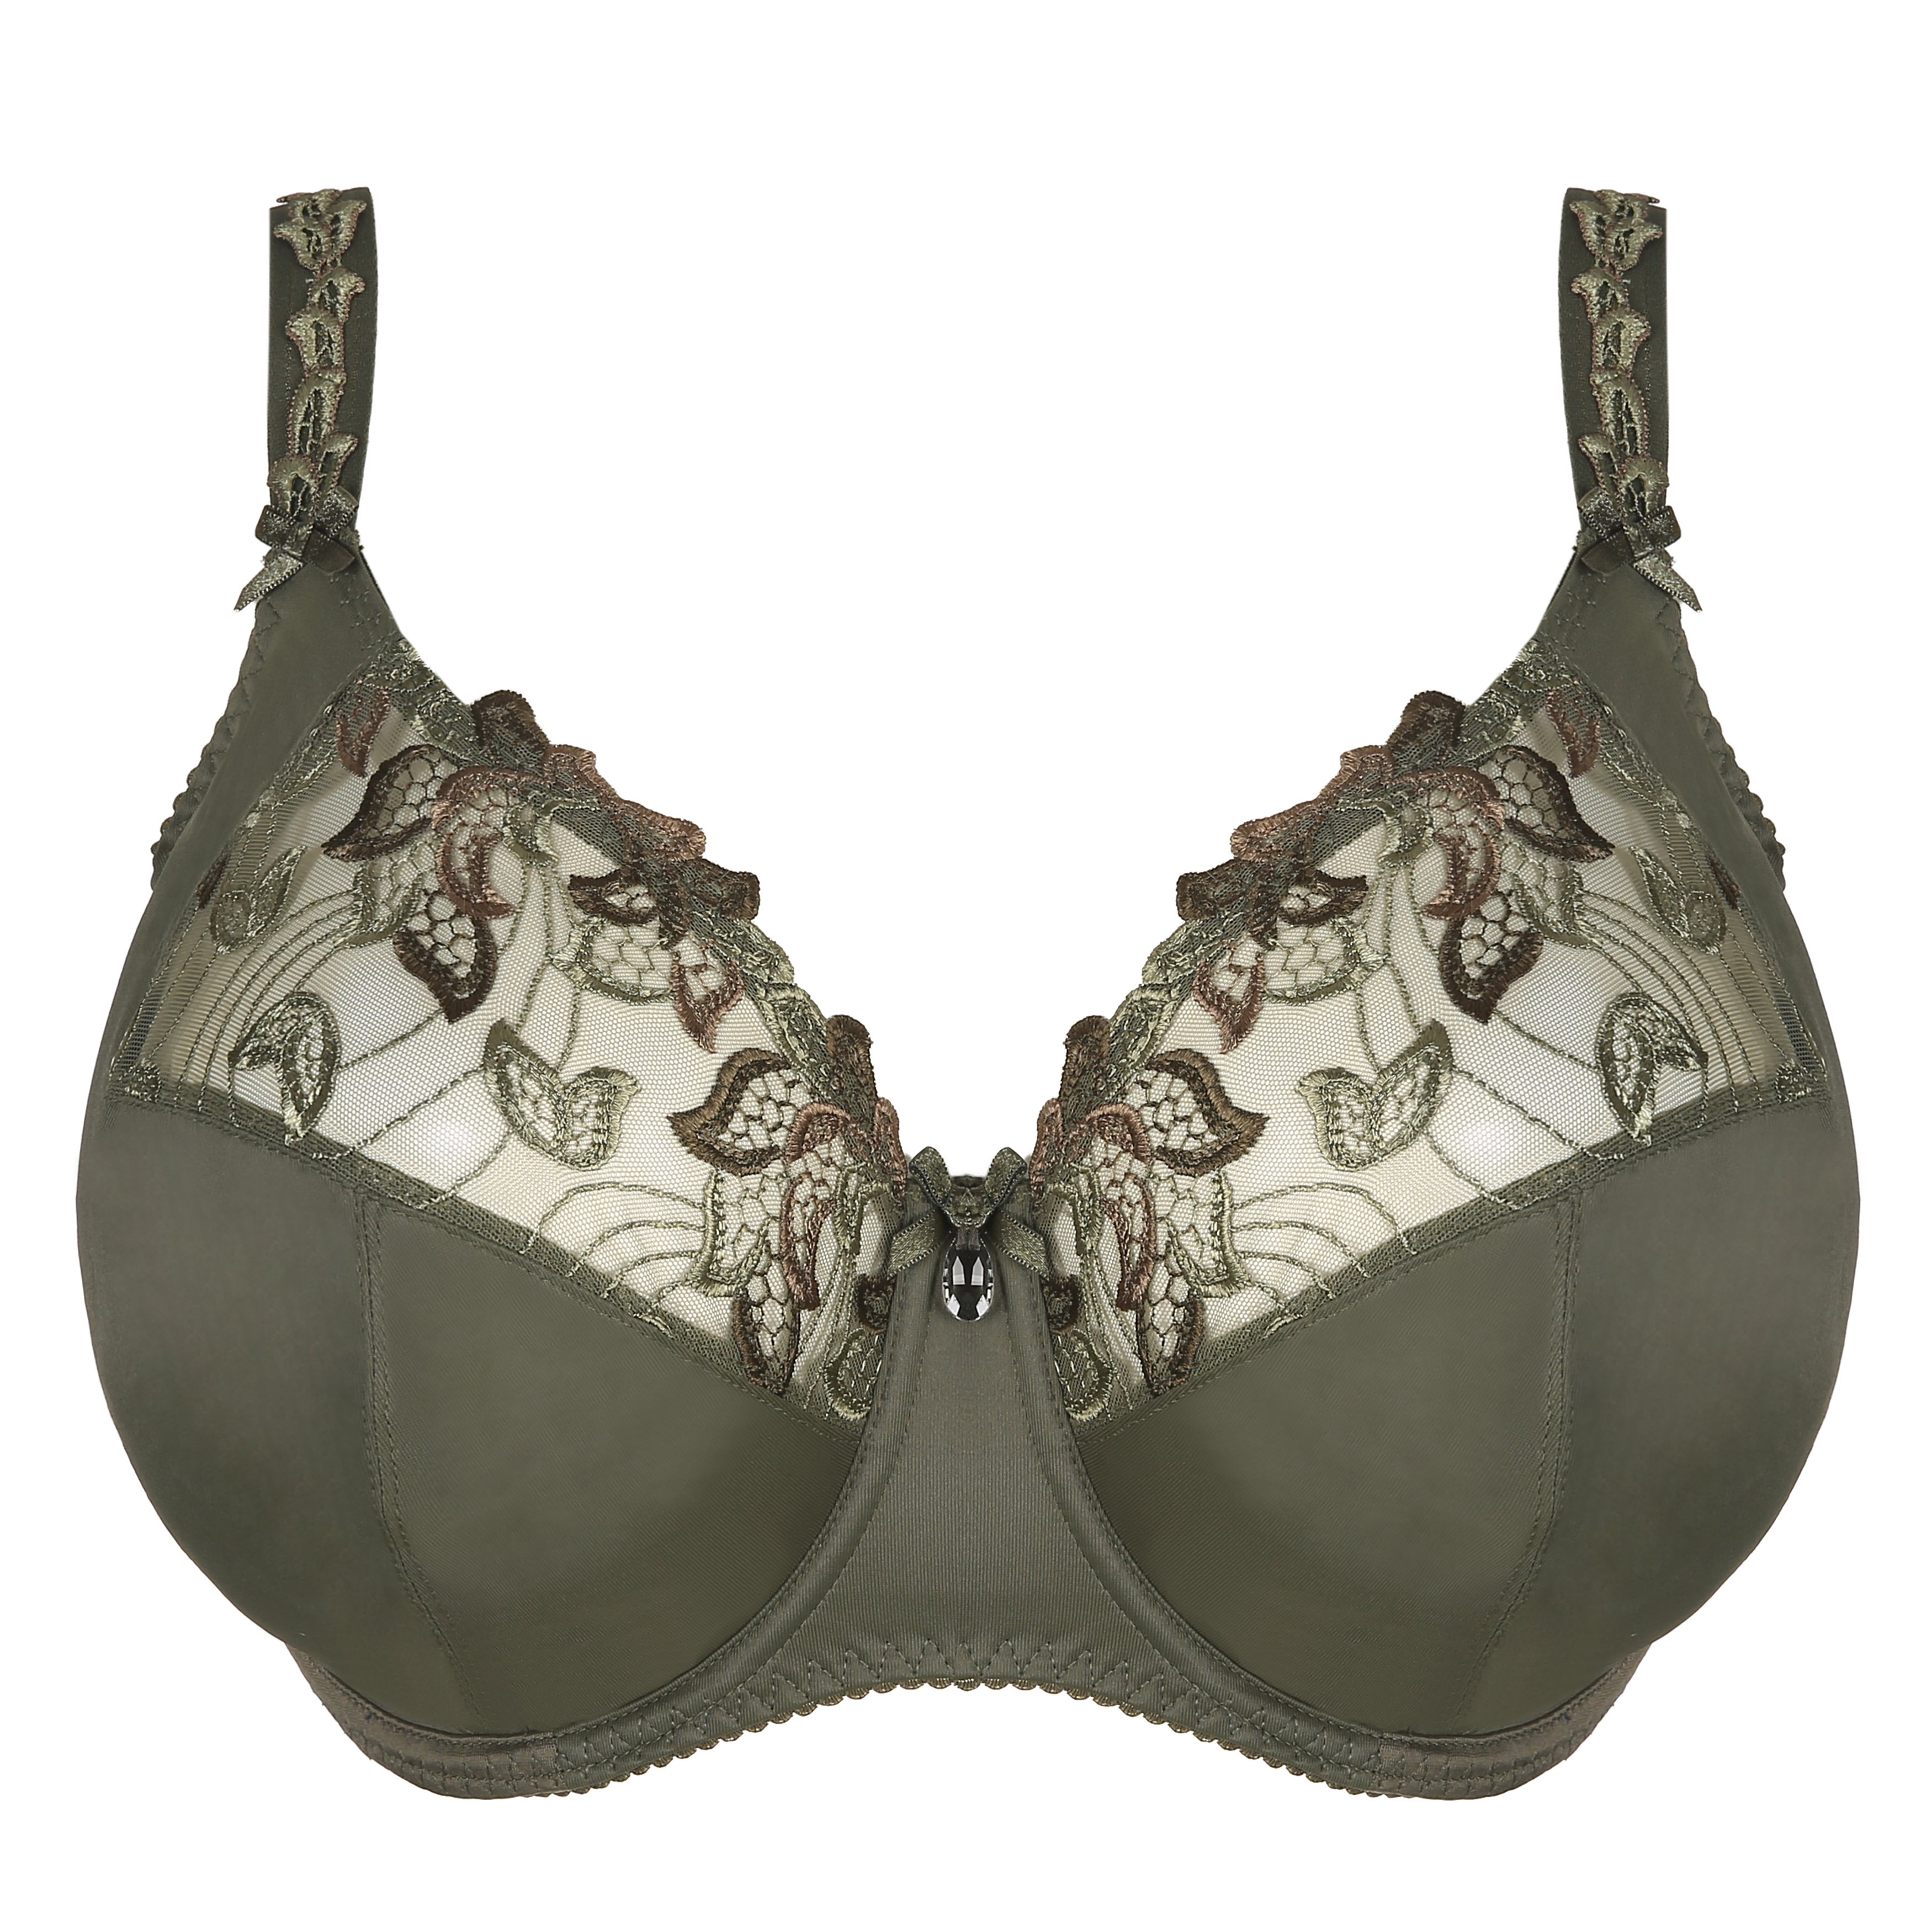 Buy Prima Donna Deauville Full Cup Bra, 36E, Ruby Gold Online at